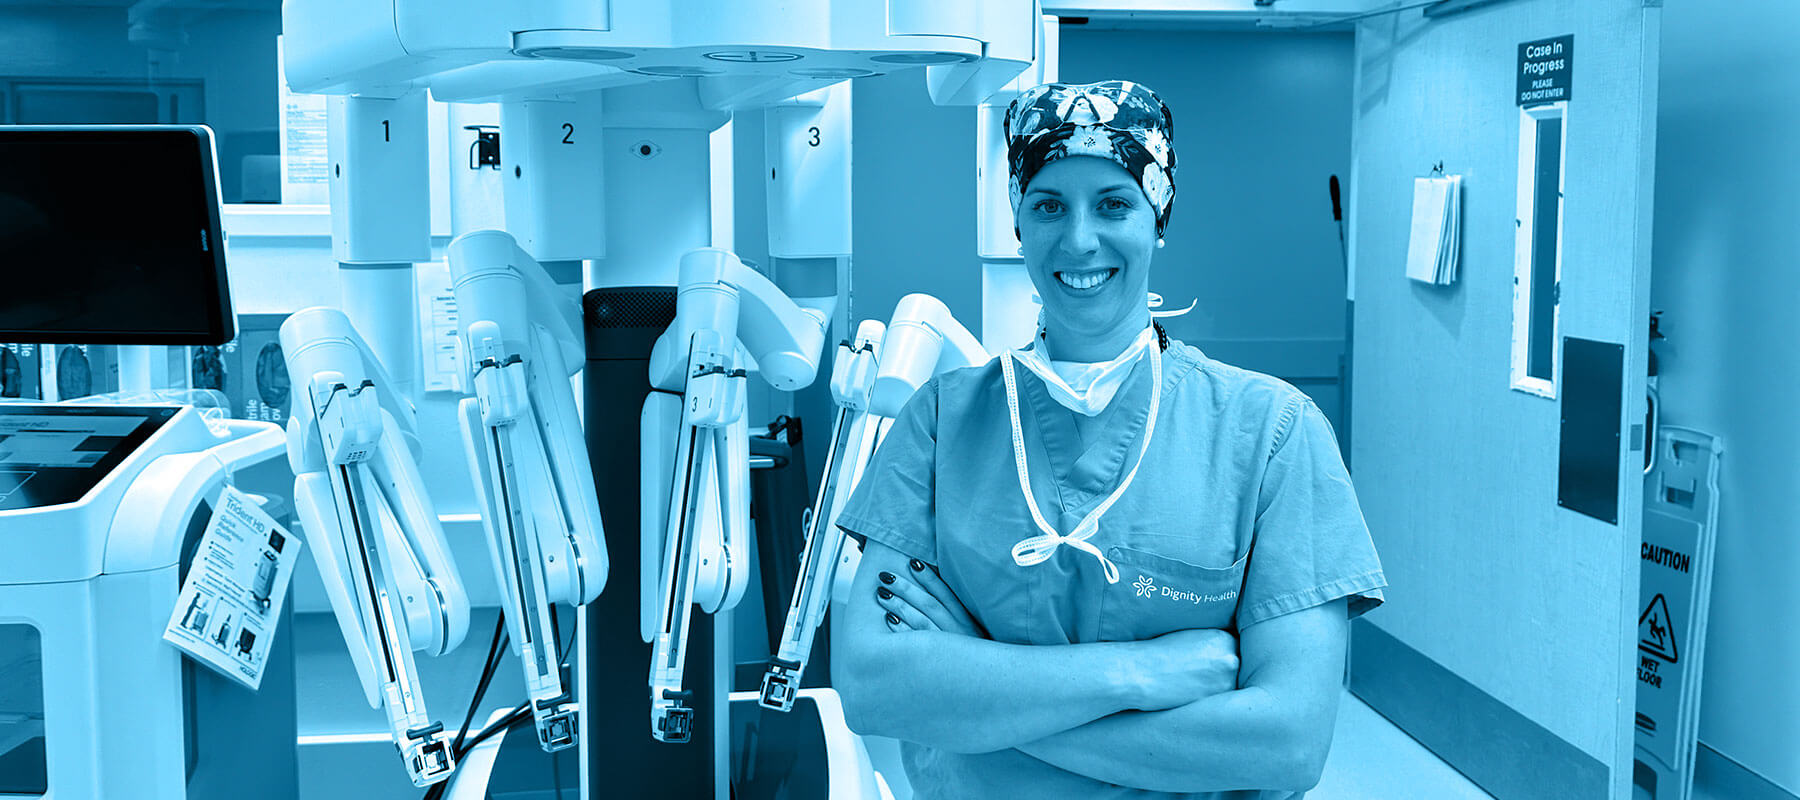 Featured Image for “Three reasons I choose Robotic Surgery for my patients”